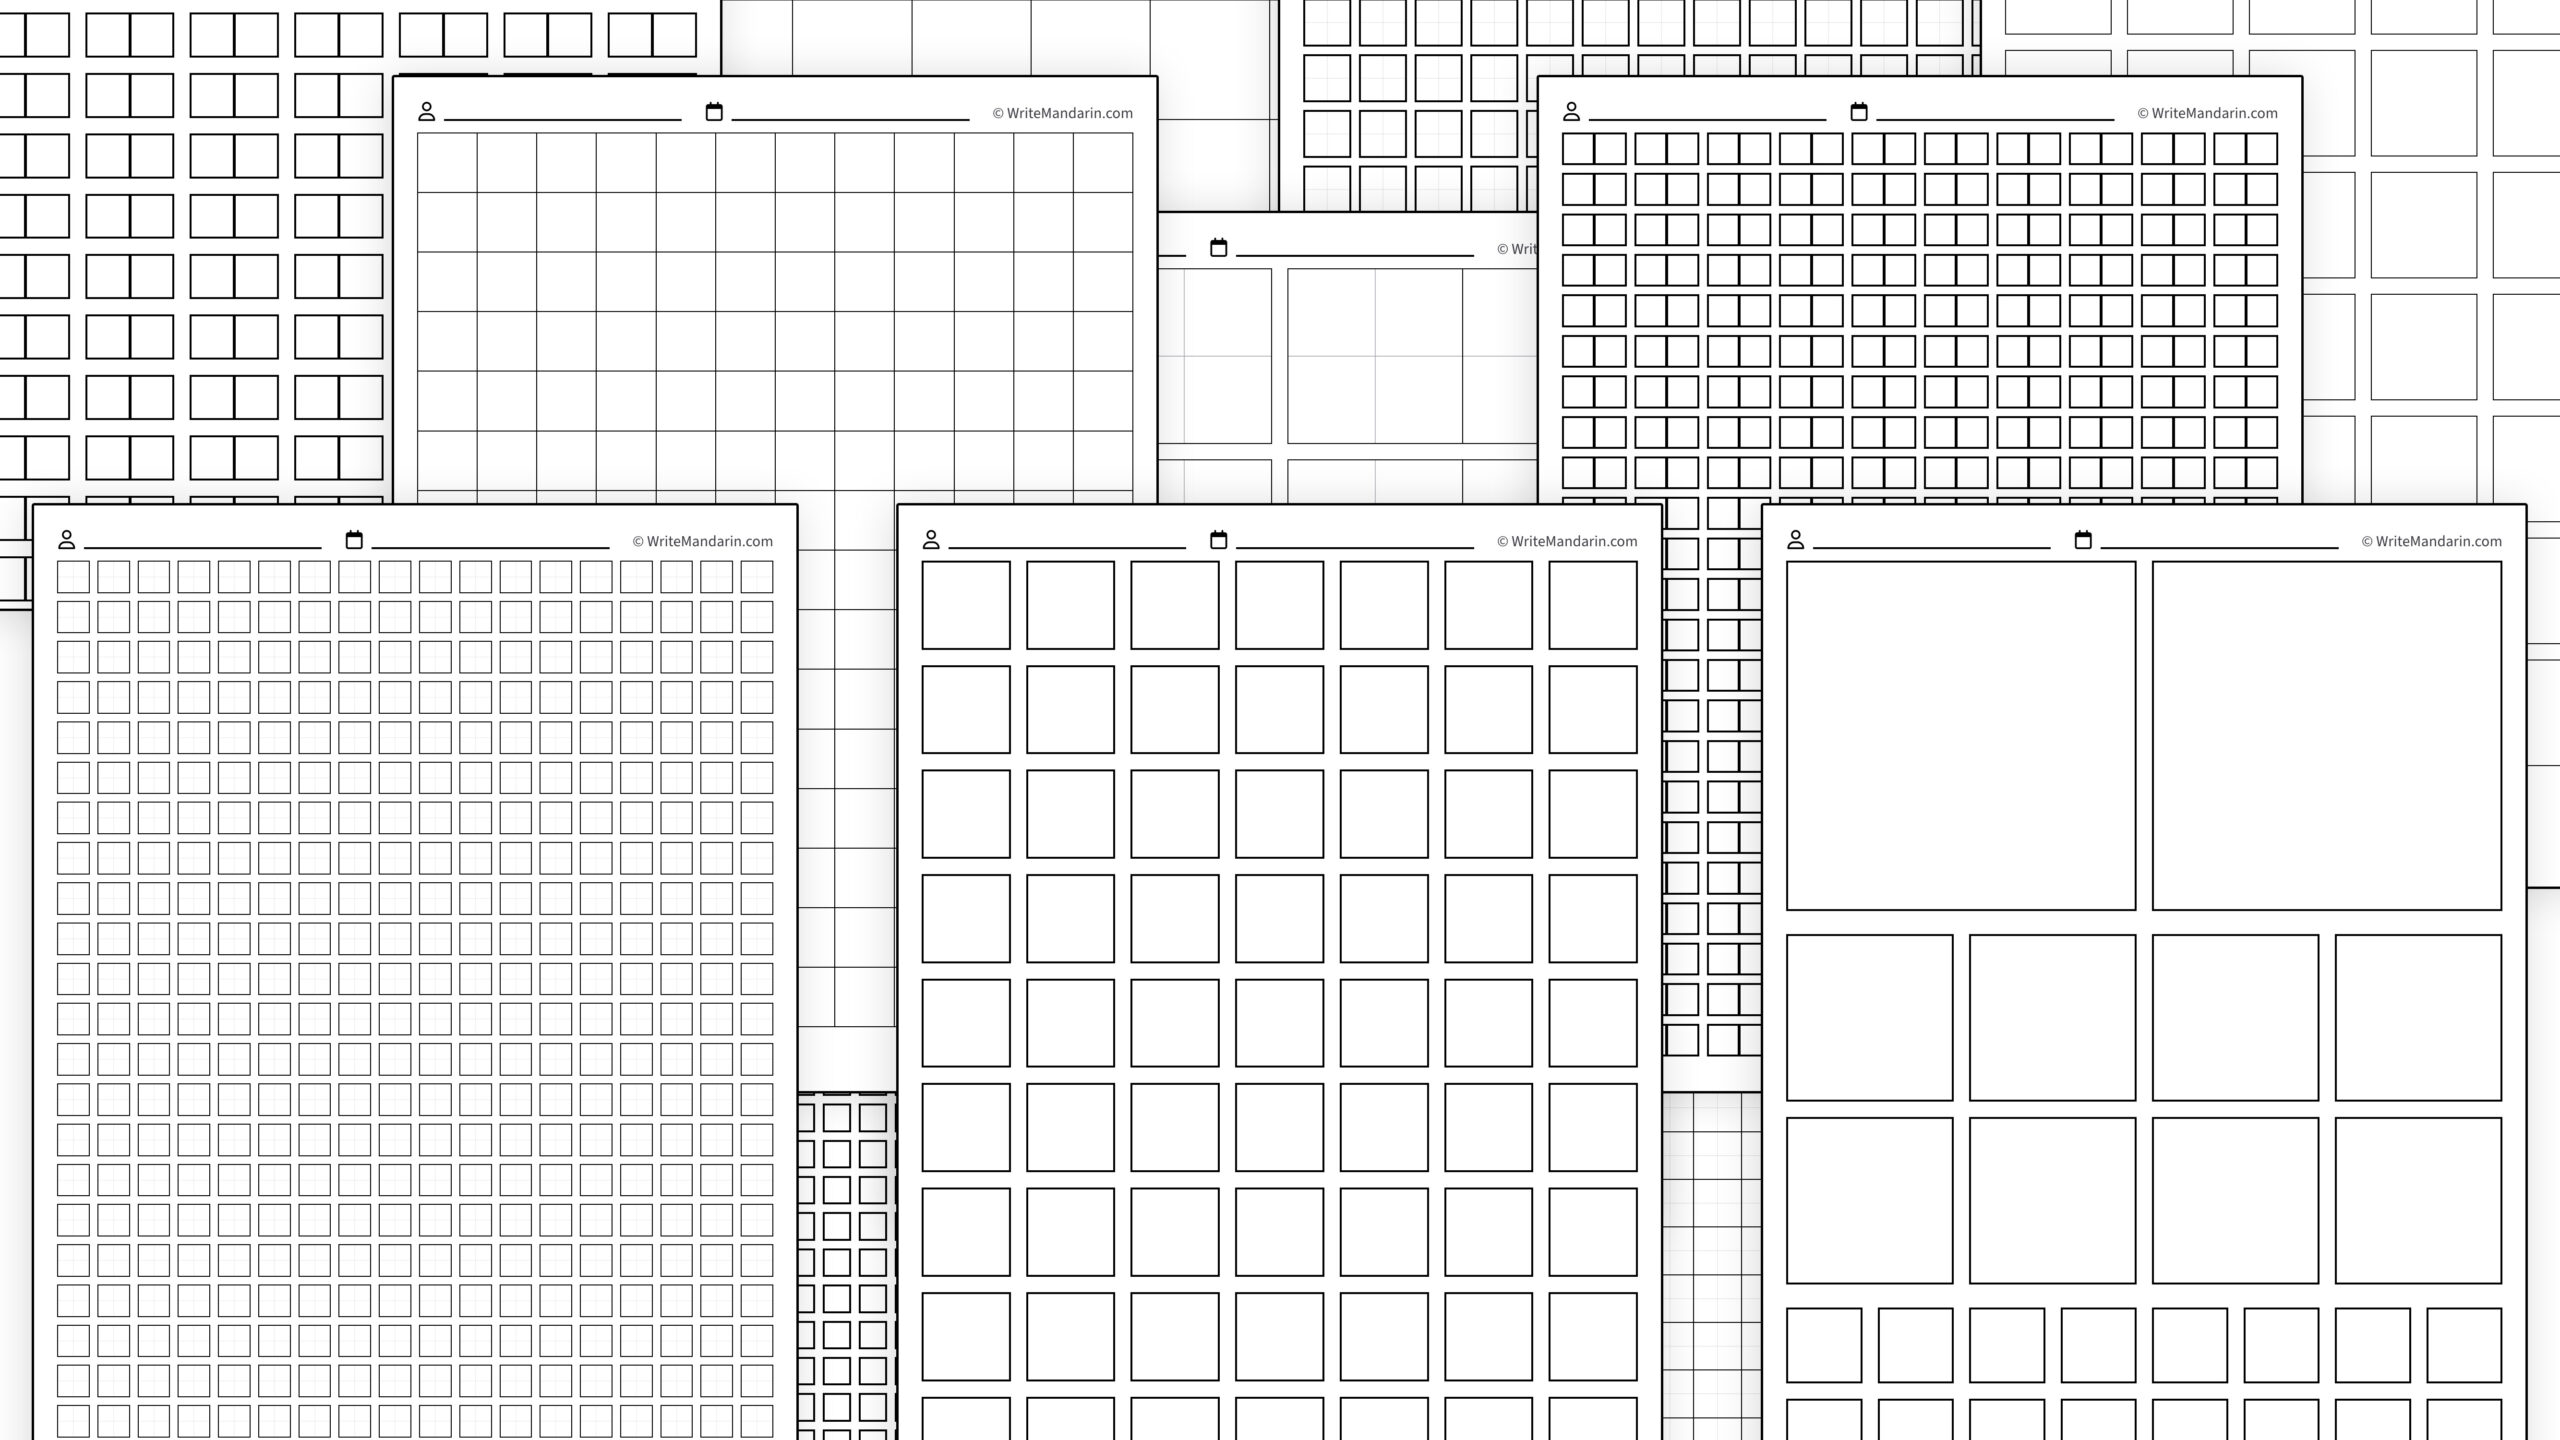 Preview image of 188 Printable Chinese Character Practice Writing Grids